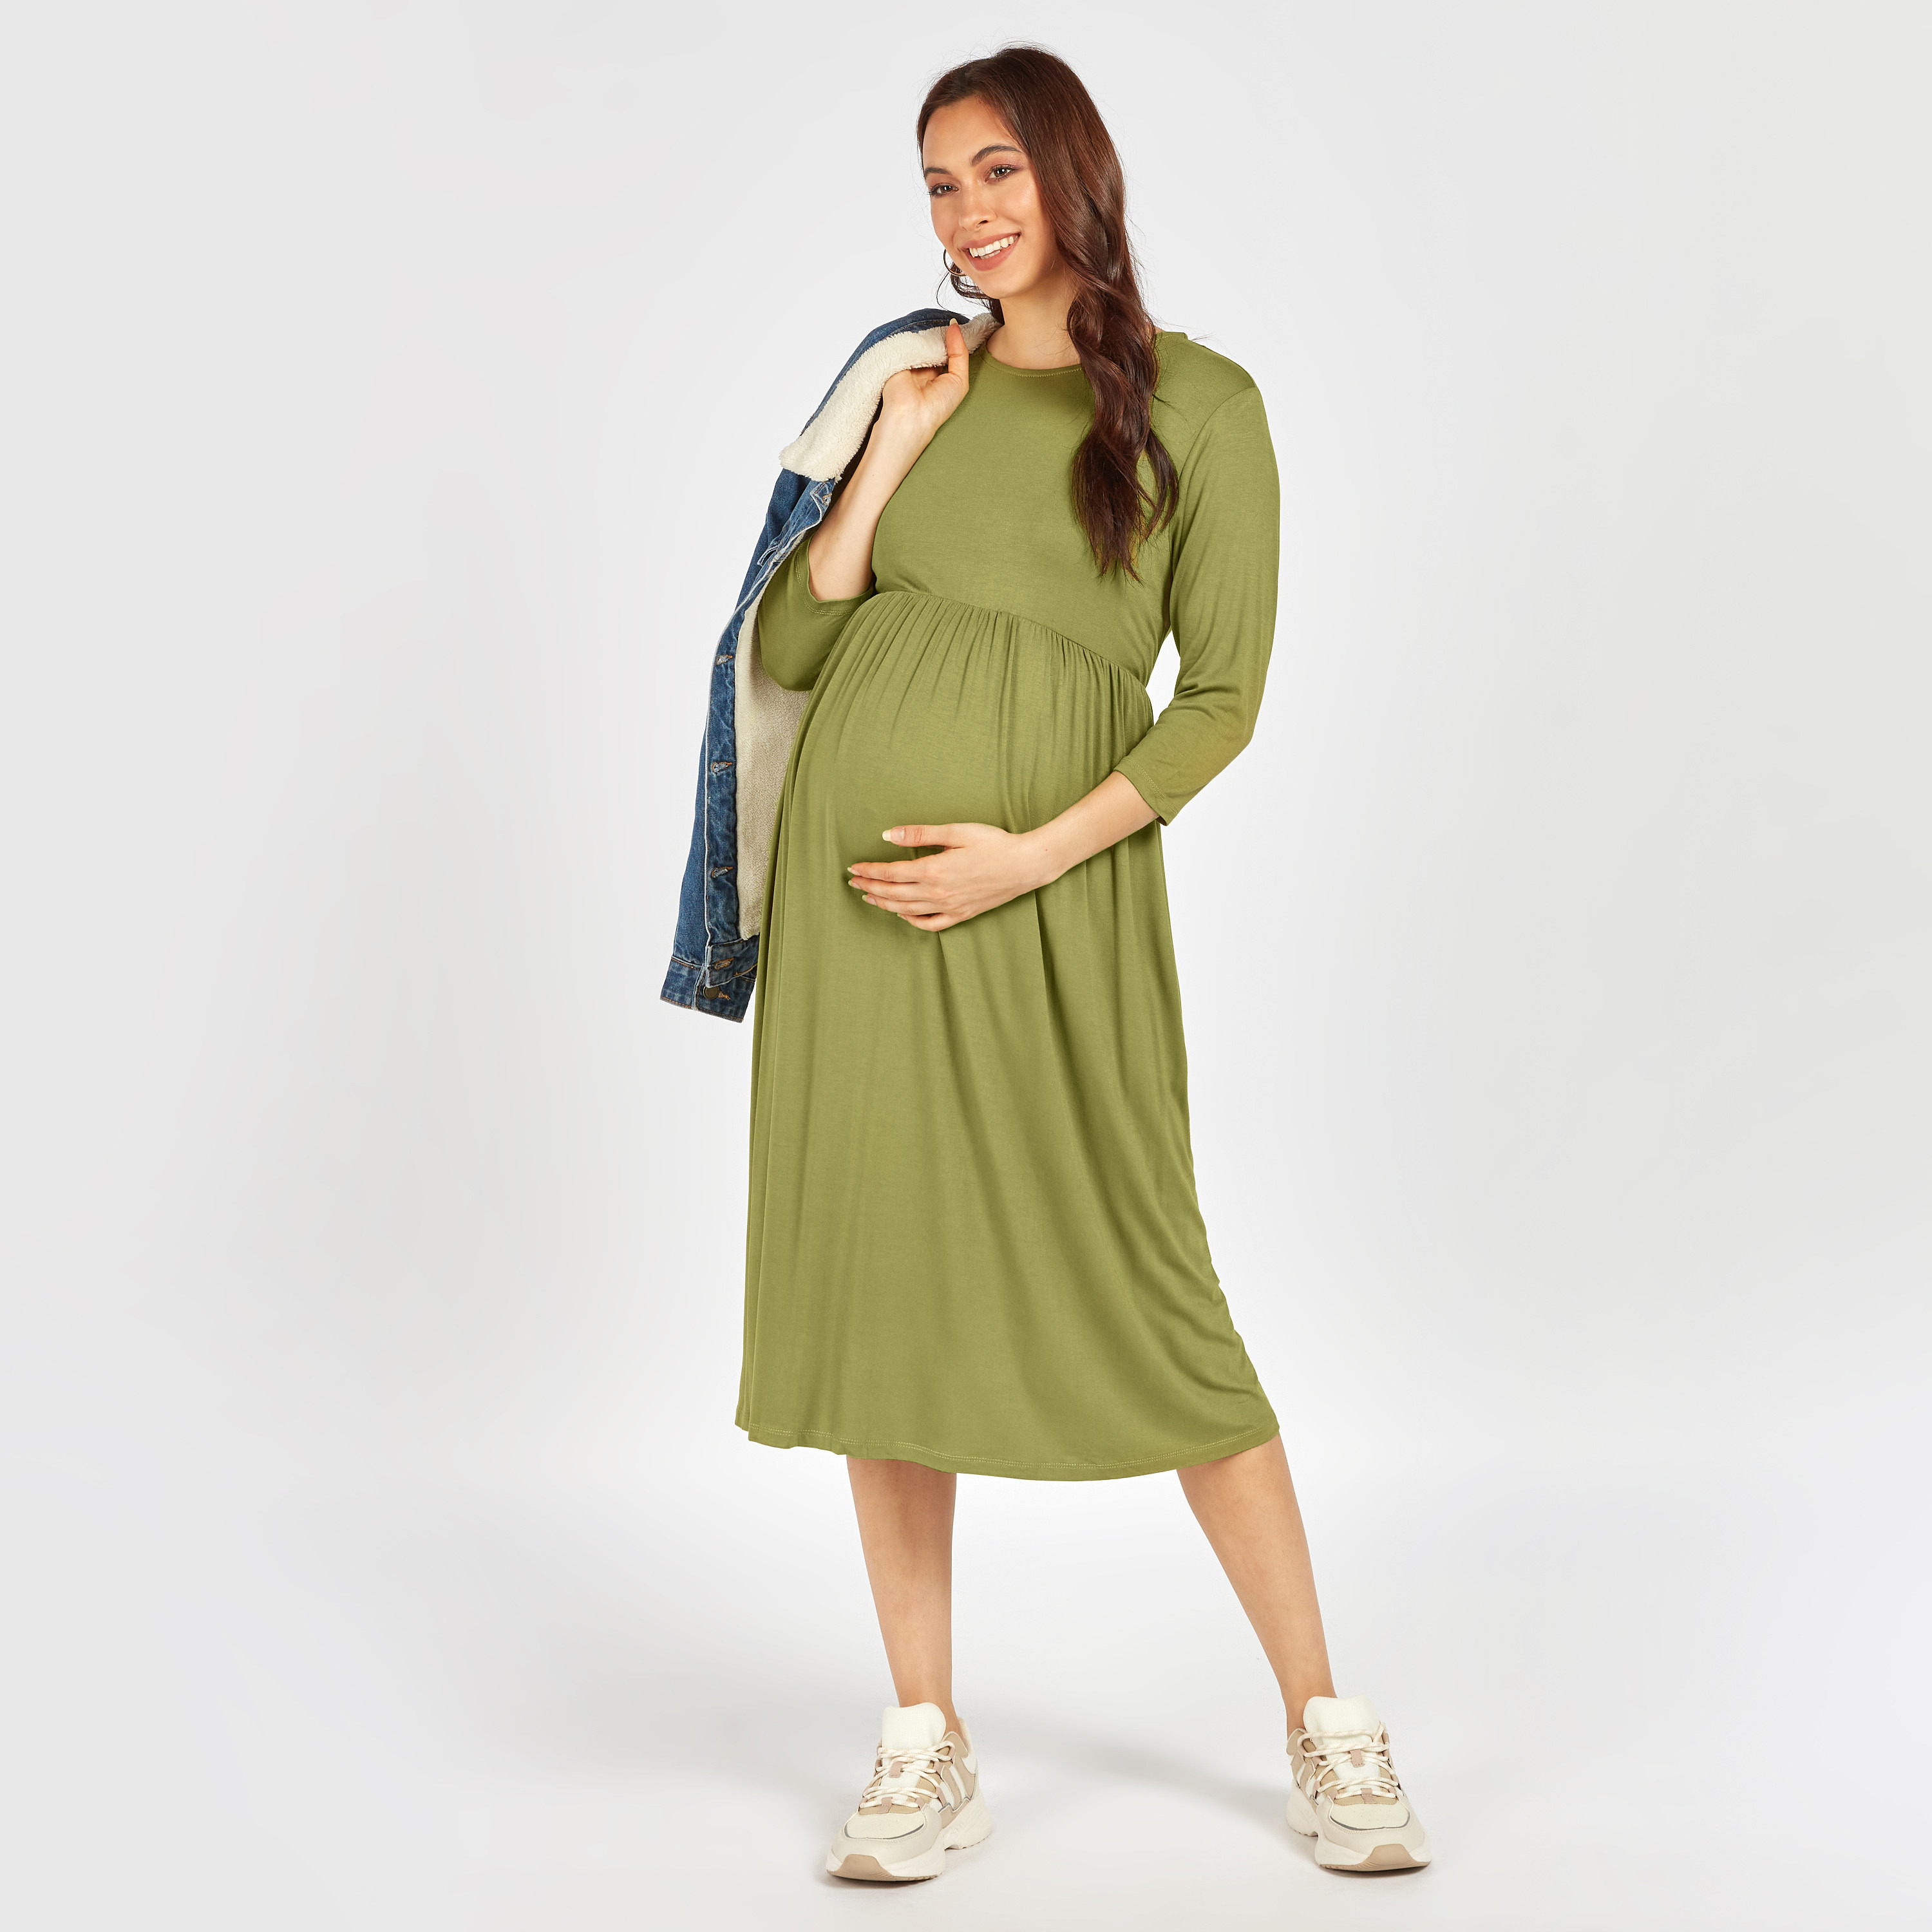 Buy Dh@ni Women's Rayon Round Neck 3/4 Sleeves Maternity Dress